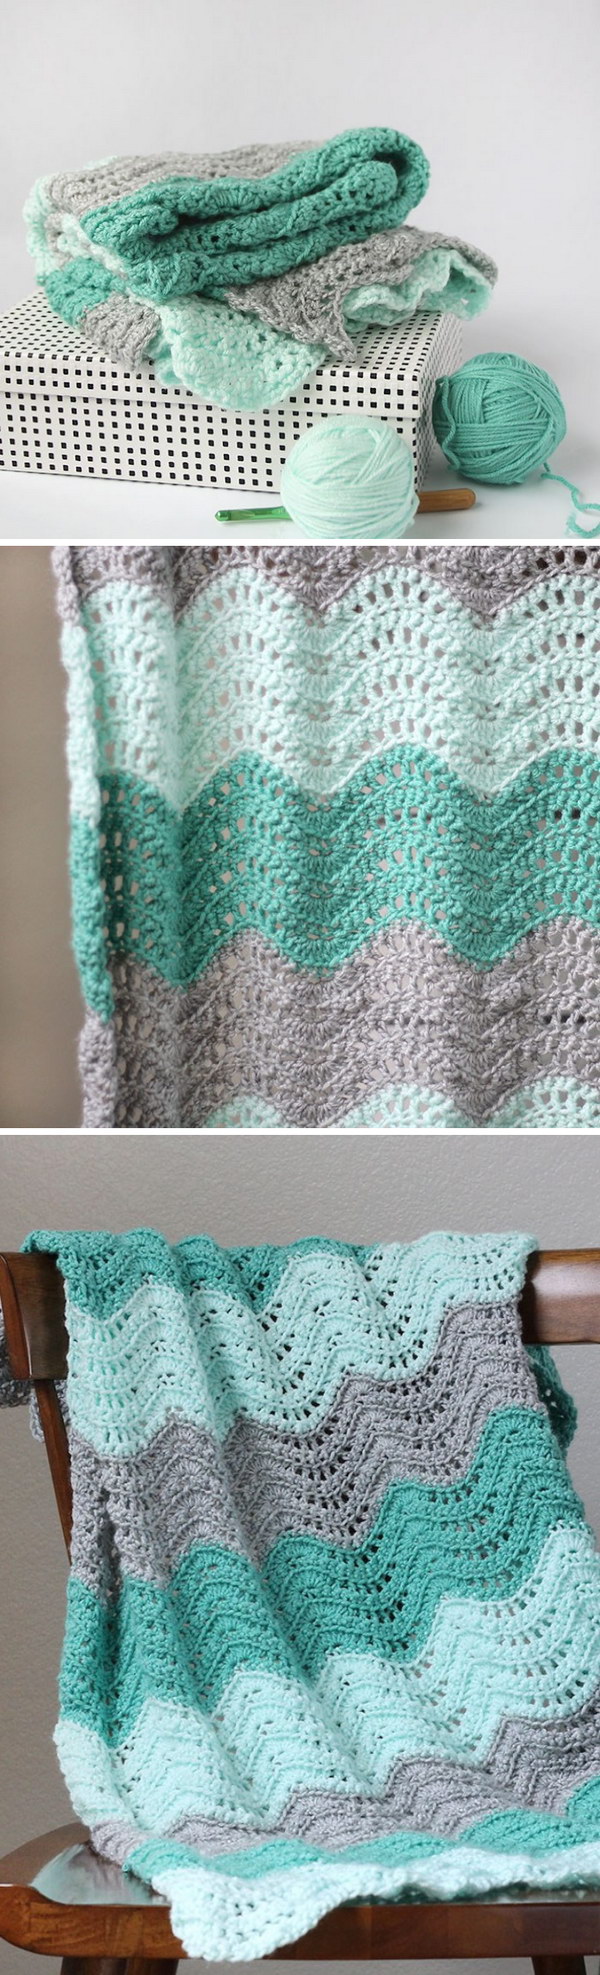 Feather And Fan Crocheted Baby Blanket. 